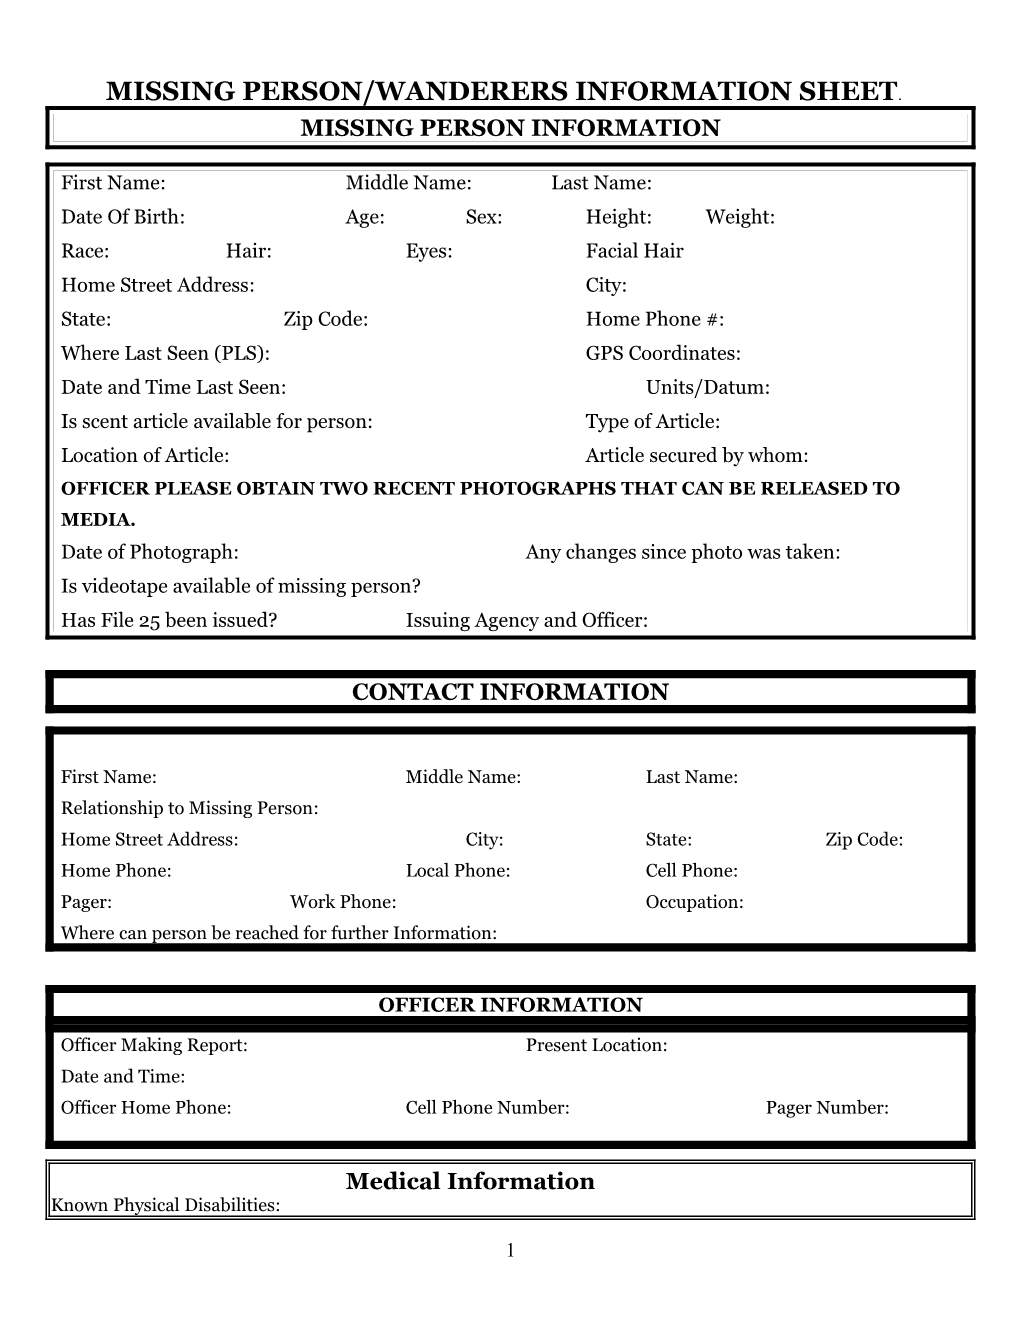 Missing Person/Wanderers Information Sheet